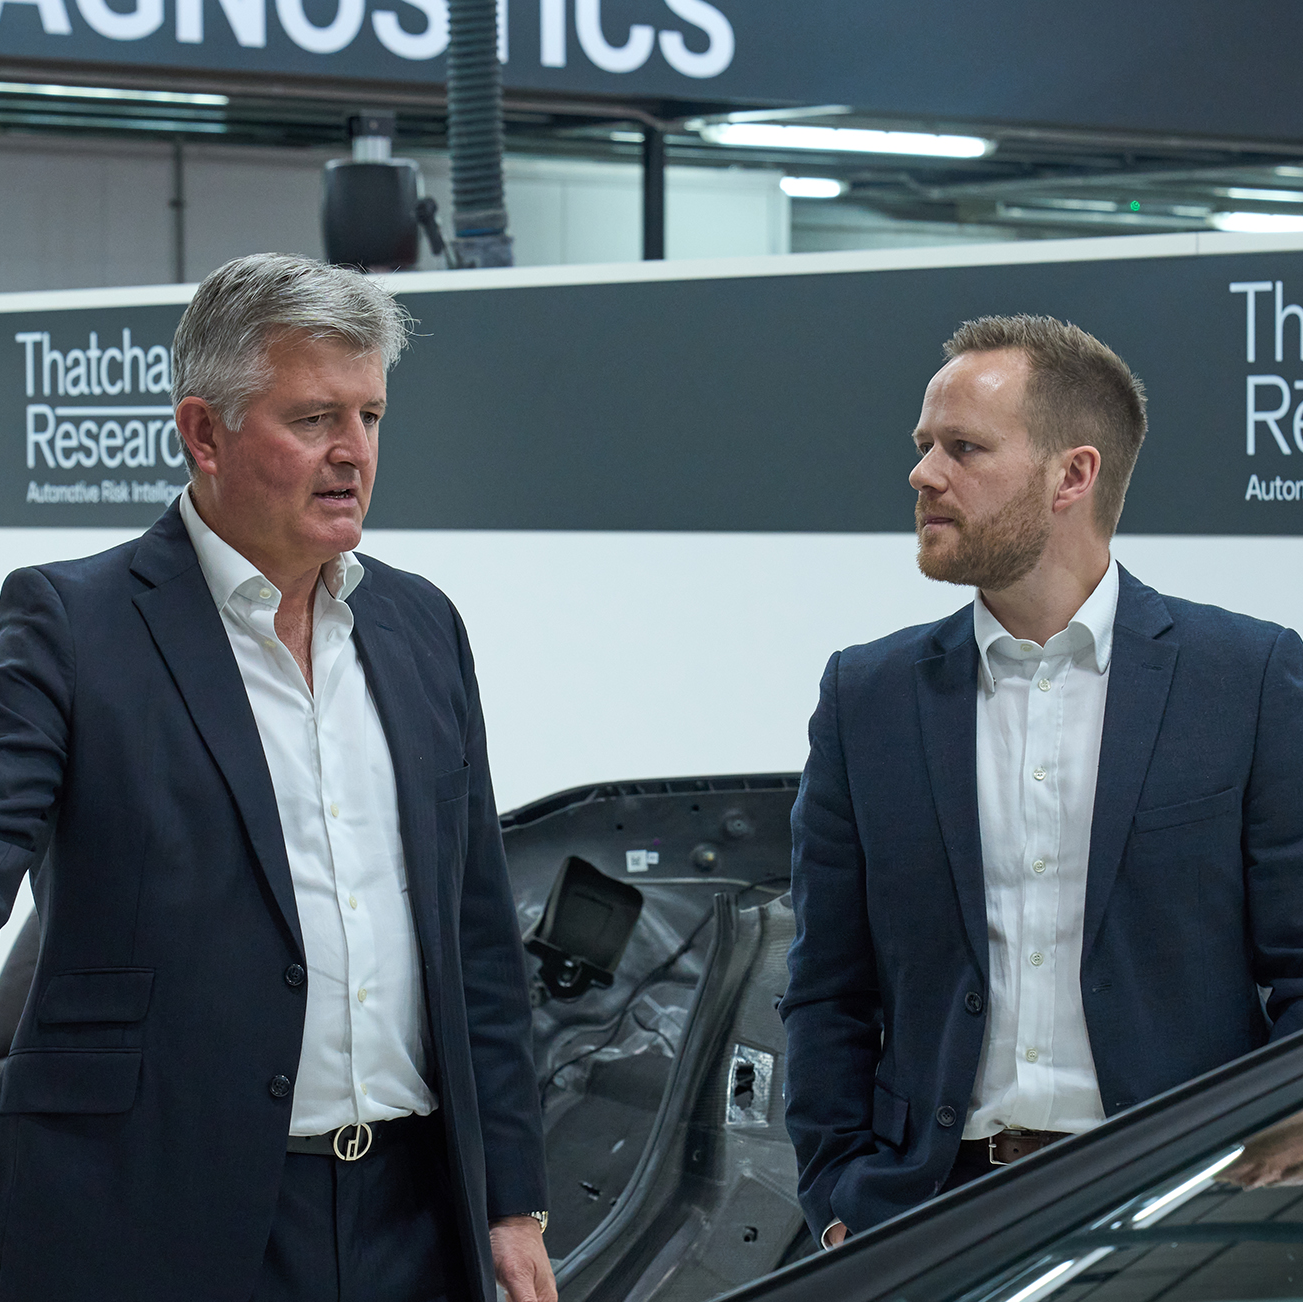 Jonathan Hewett, Thatcham Research chief executive gives James Burton, UK MD LexisNexis Risk Solutions, a tour of the Repair Technology Centre